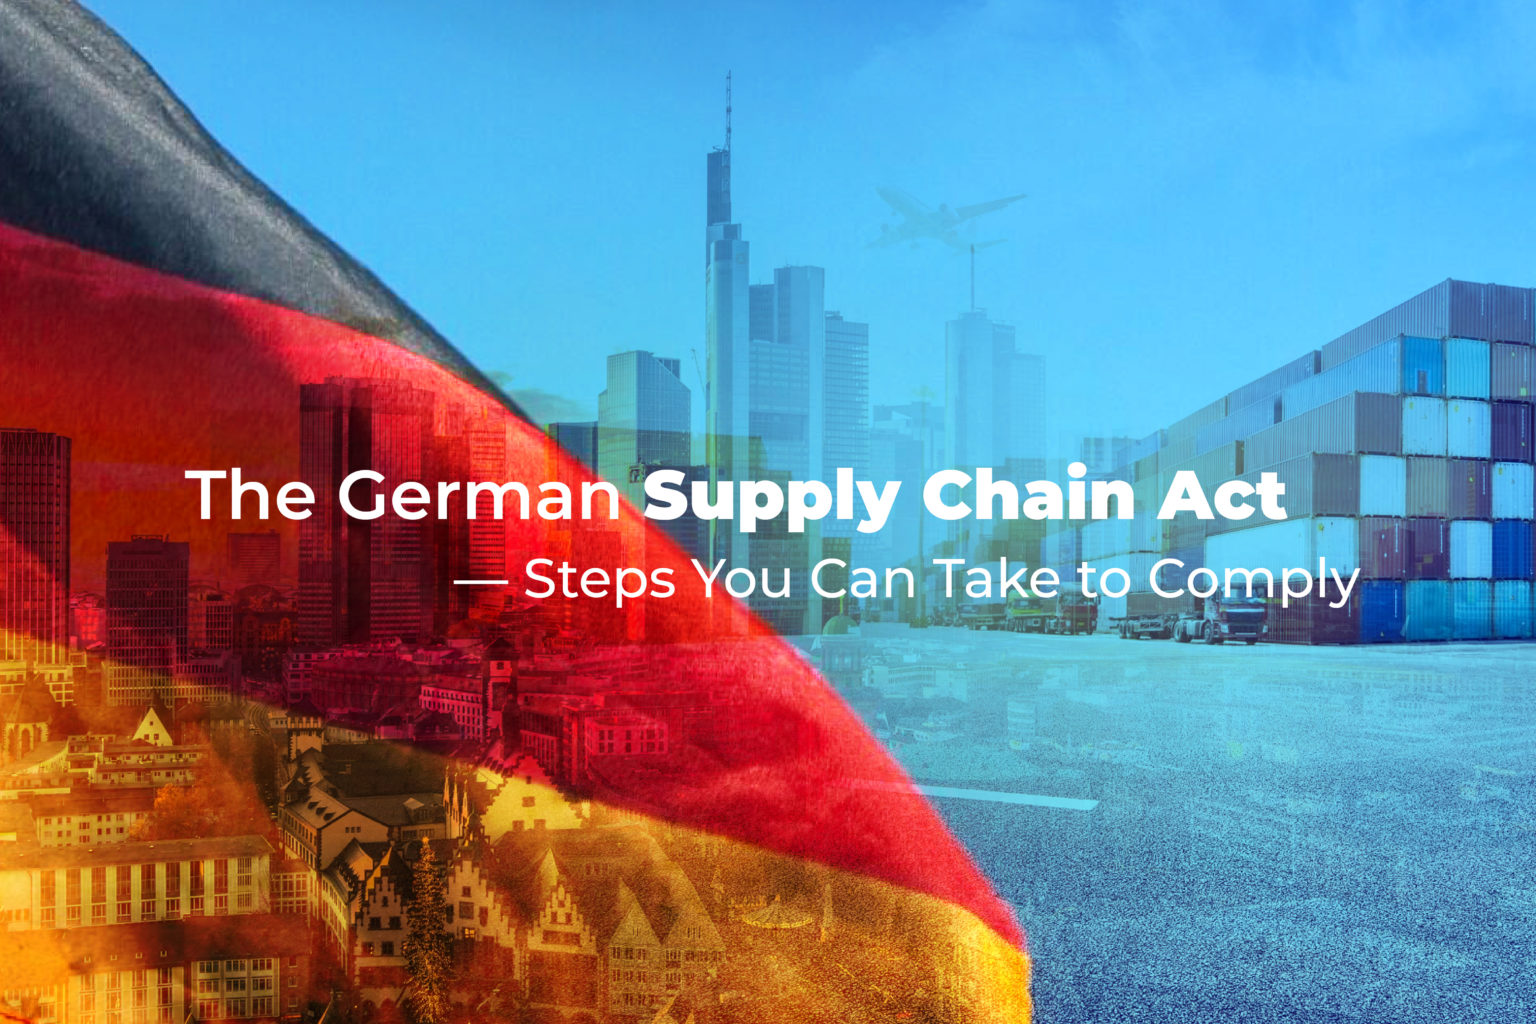 The German Supply Chain Act — Steps You Can Take to Comply